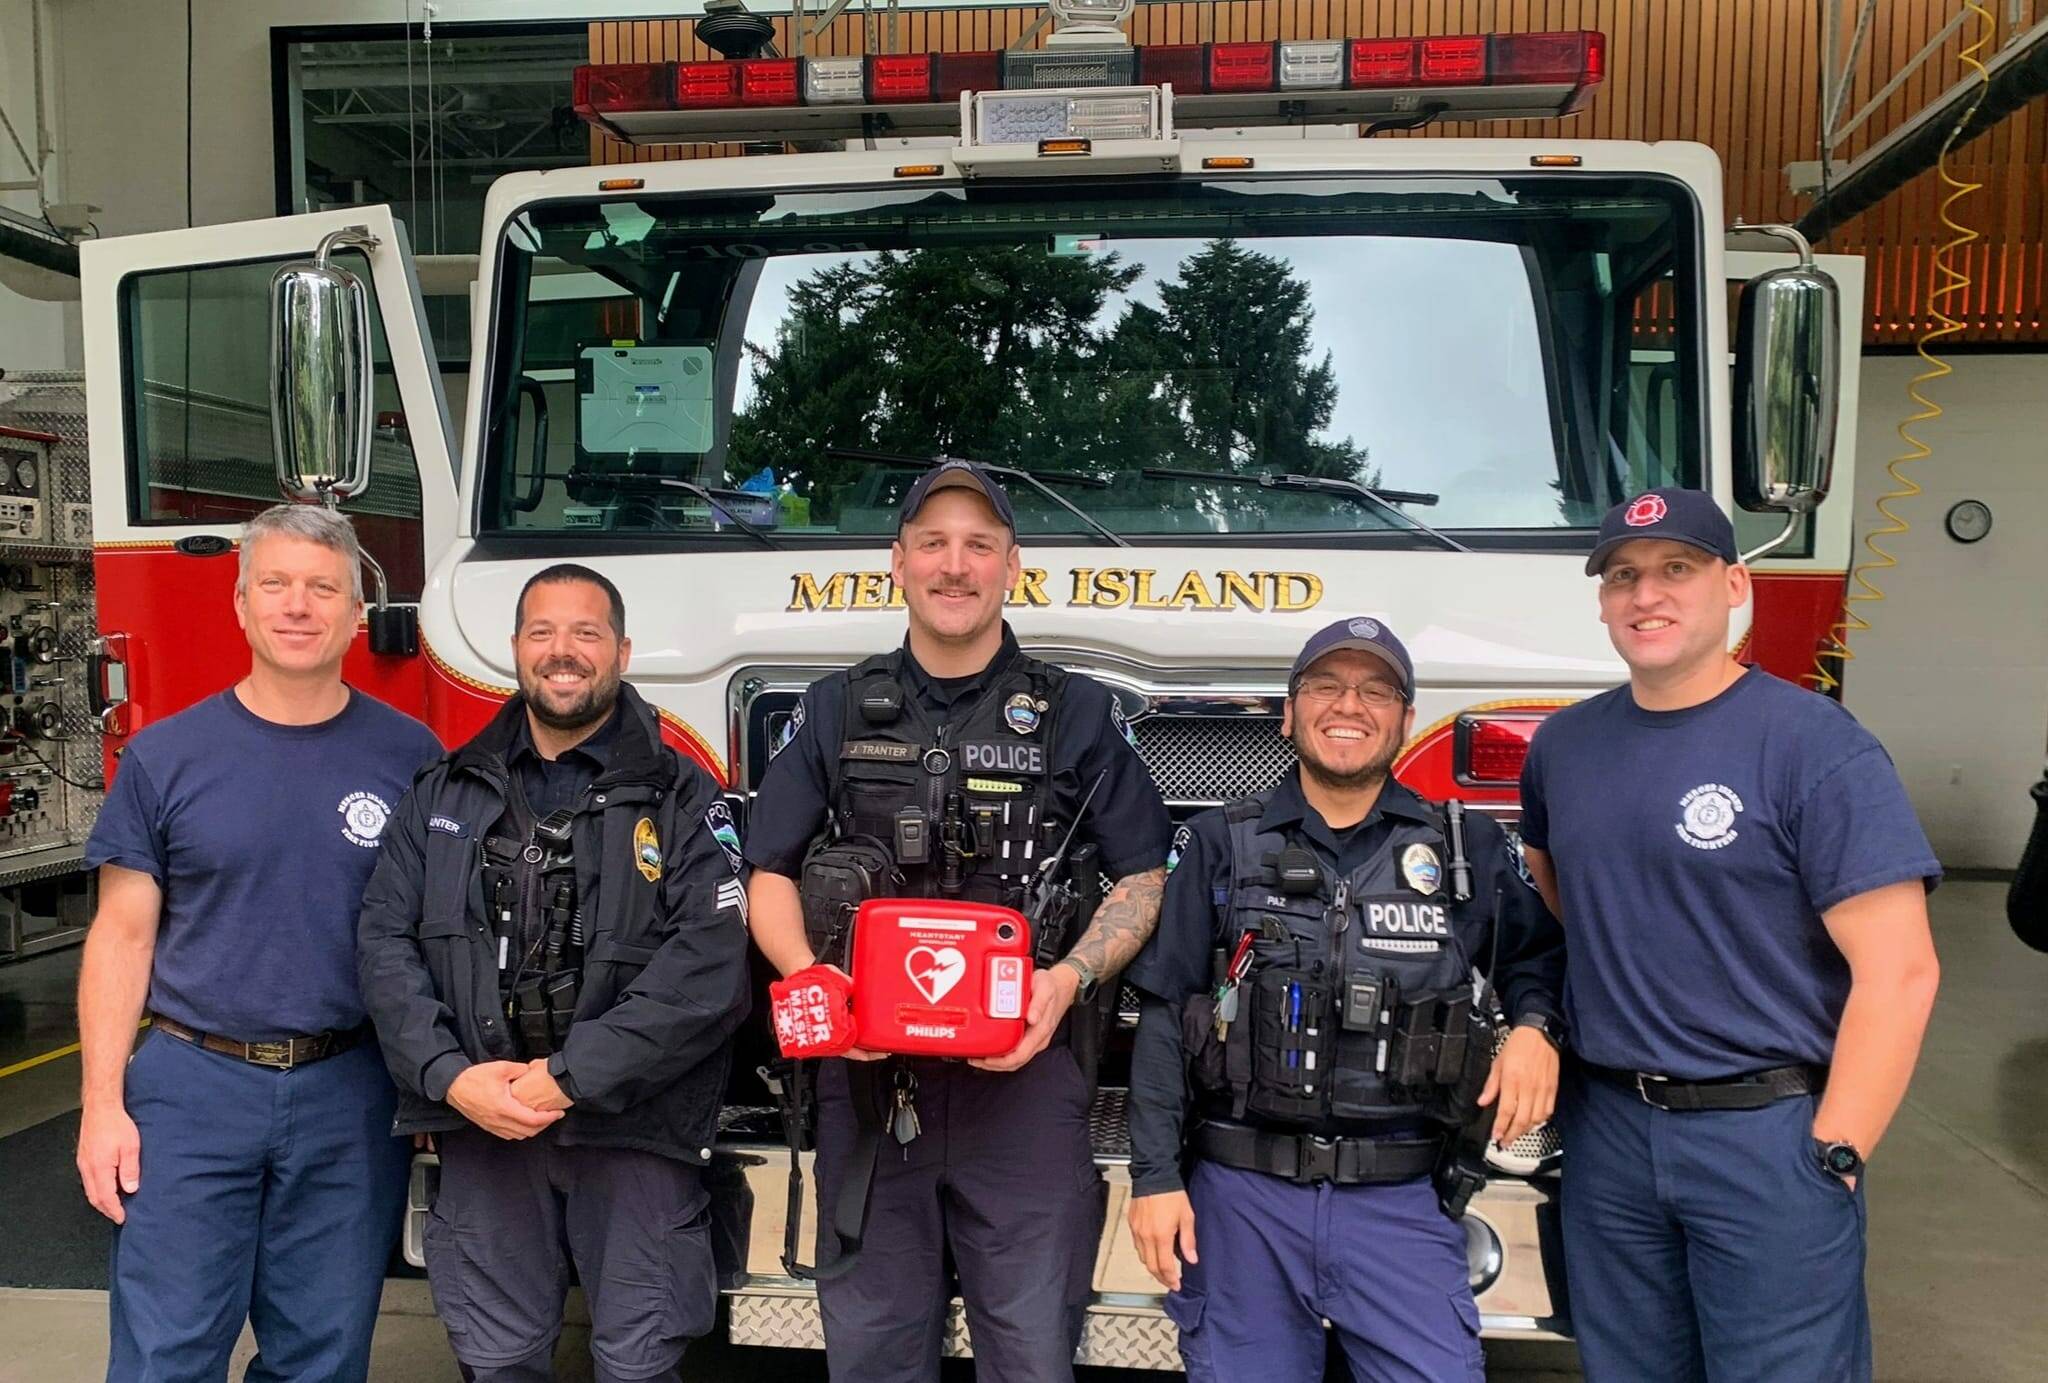 The Mercer Island Fire Department recently secured brand new, lifesaving AED (automated external defibrillator) devices for Mercer Island Police Department officers to utilize in every police patrol vehicle and on board its Marine Patrol boats. Officers are all first-aid trained and are immediately dispatched to every medical call involving a cardiac arrest. Officers are often already driving around the Island and can arrive to the scene ahead of the fire trucks and begin CPR. “This teamwork between us and our fire department can mean the difference between life and death when every minute counts,” the police department noted. Pictured are, from left to right, fire department Lt. Ray Austin, the police department’s Sgt. David Canter, officer Jordan Tranter and officer Luiz Paz and firefighter Joe White. Photo courtesy of the Mercer Island Police Department